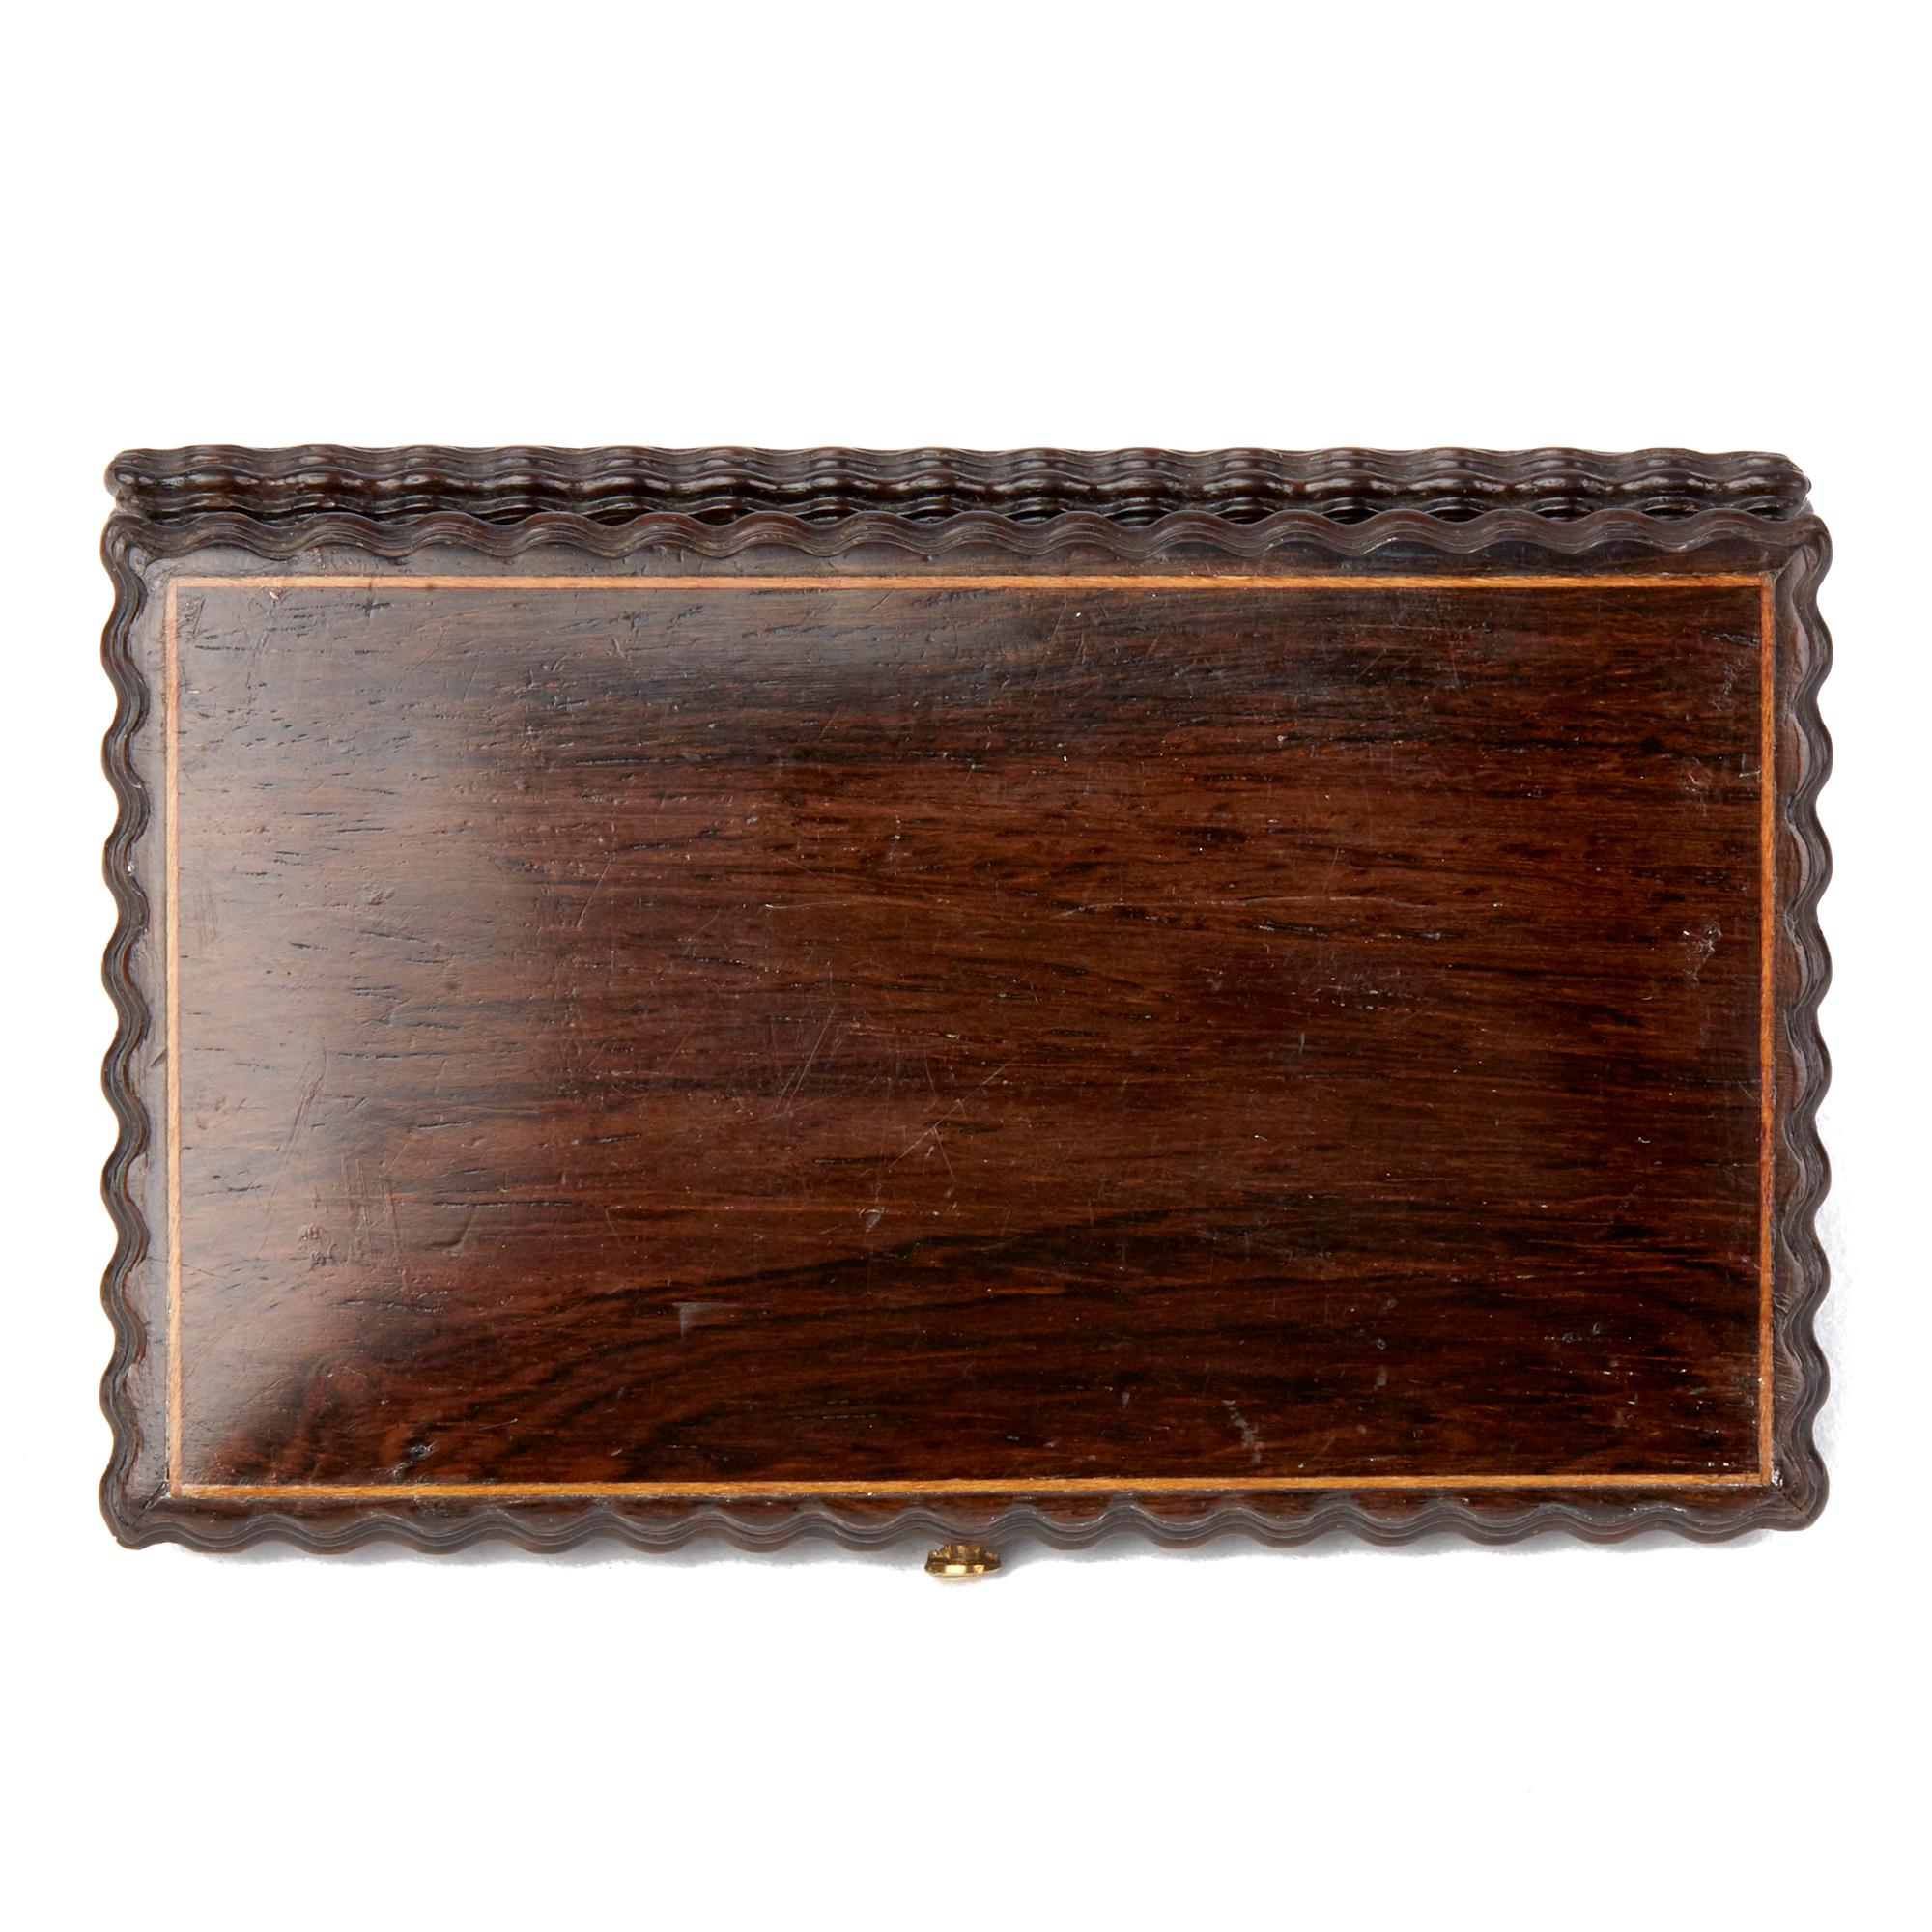 A very fine antique carved rose wood needle case with hinged cover with spring clasp and with central inset brass cartouche, the edges of the box with finely carved detail and with inset contrasting wood piping around the edges of the top and base